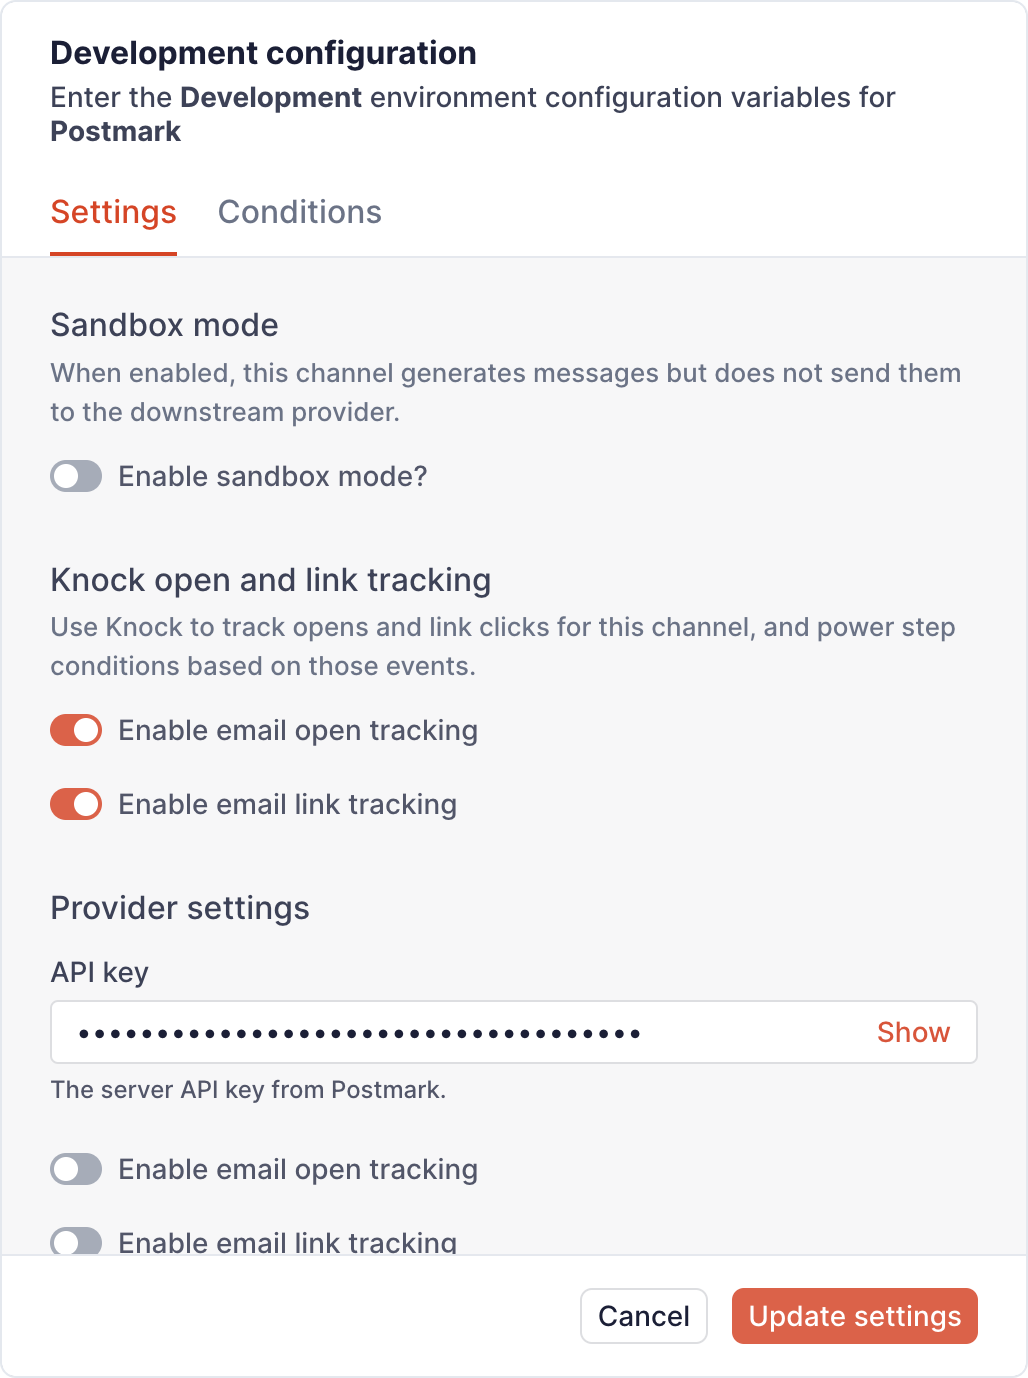 Configuring Knock tracking for an email channel